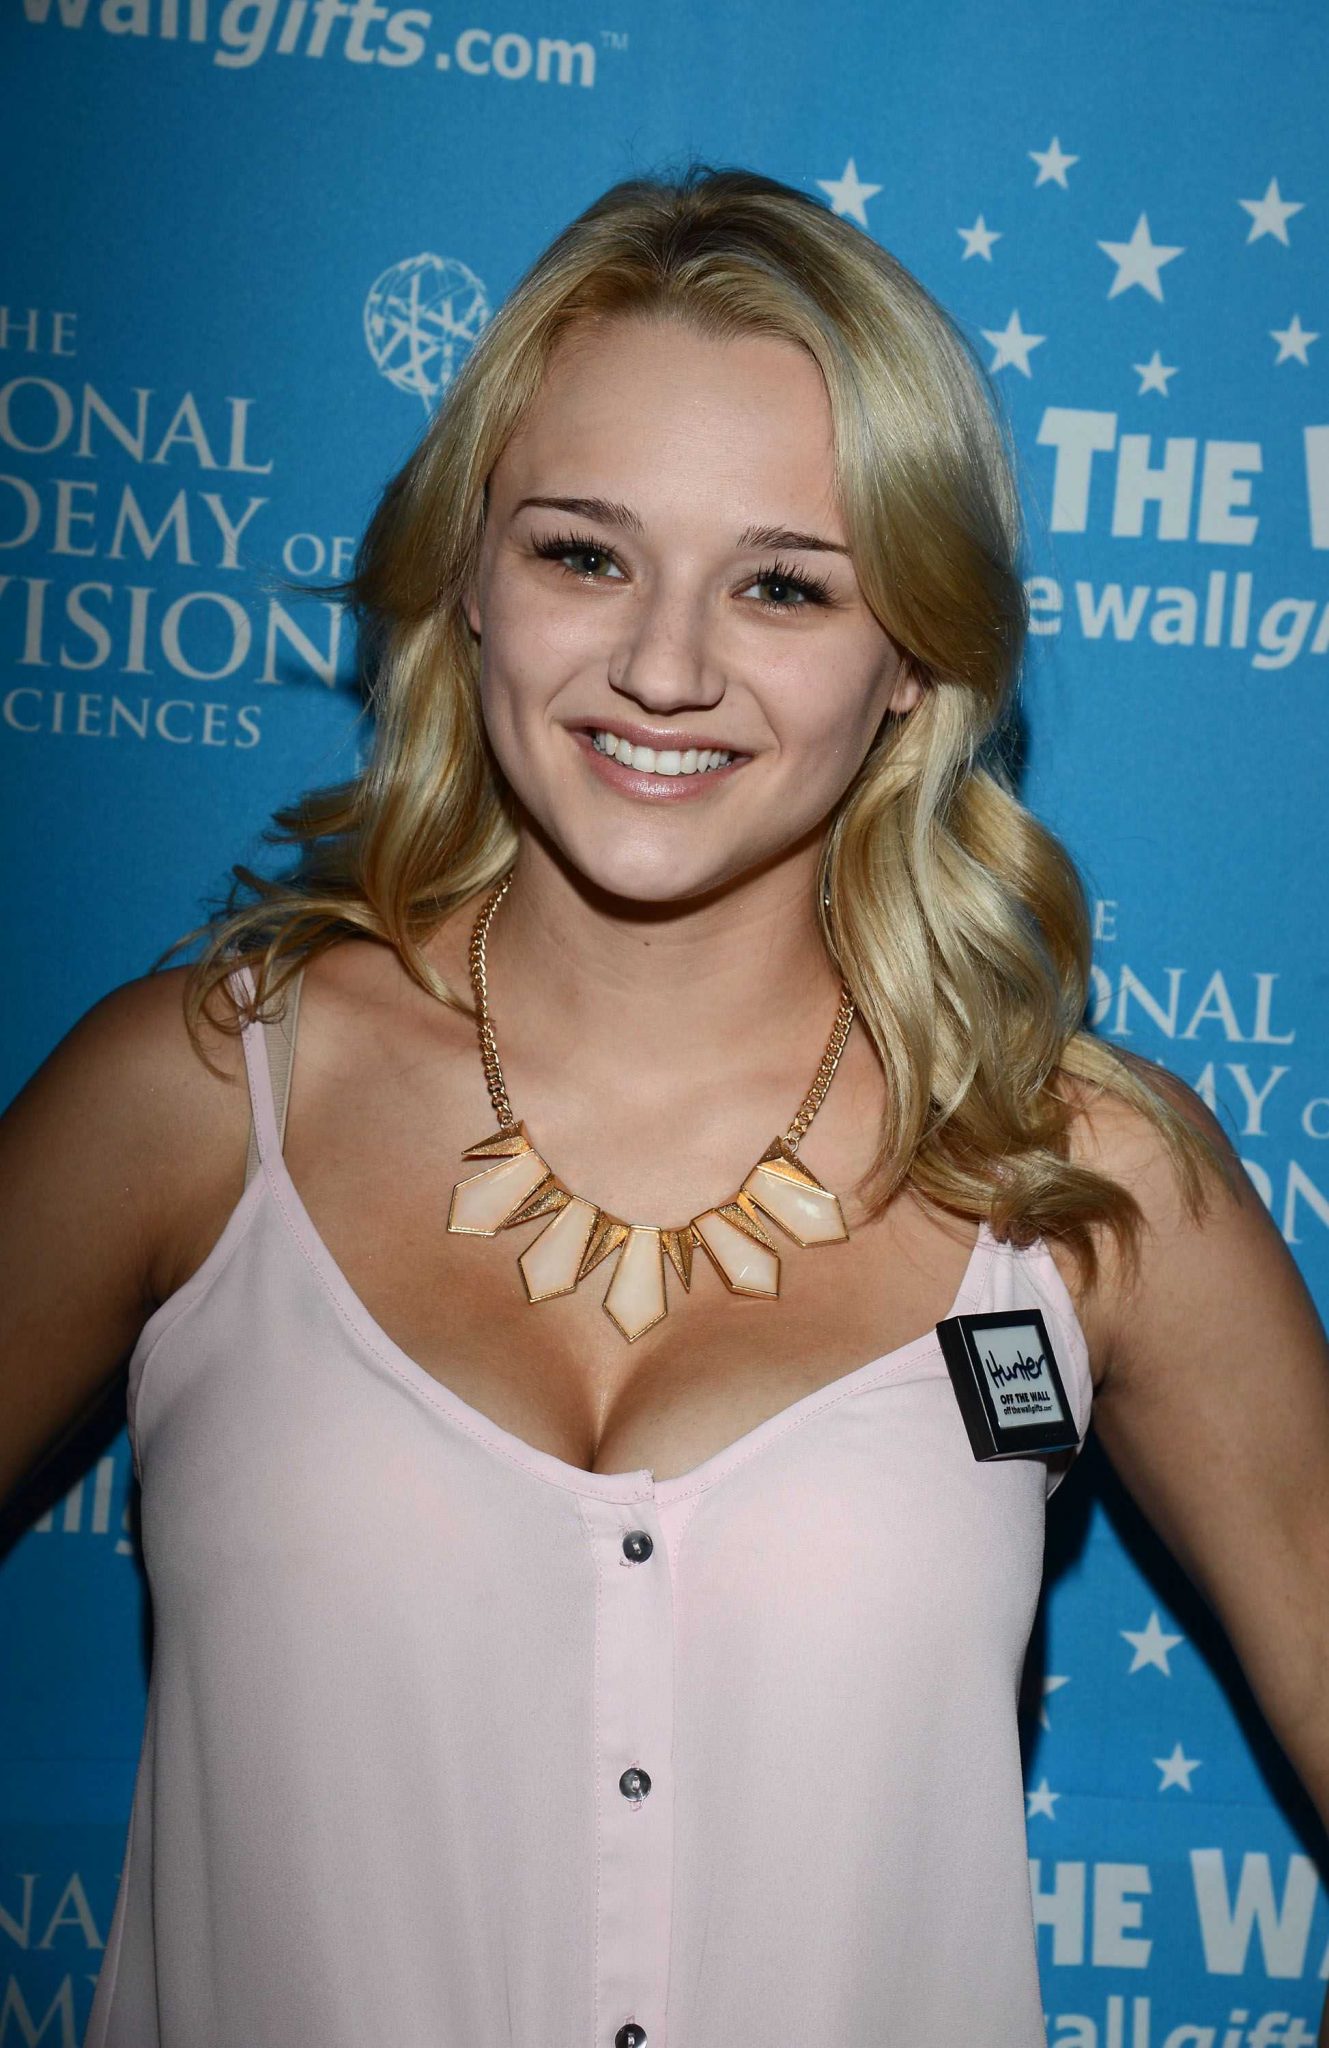 51 Hunter King Nude Pictures Display Her As A Skilled Performer 18